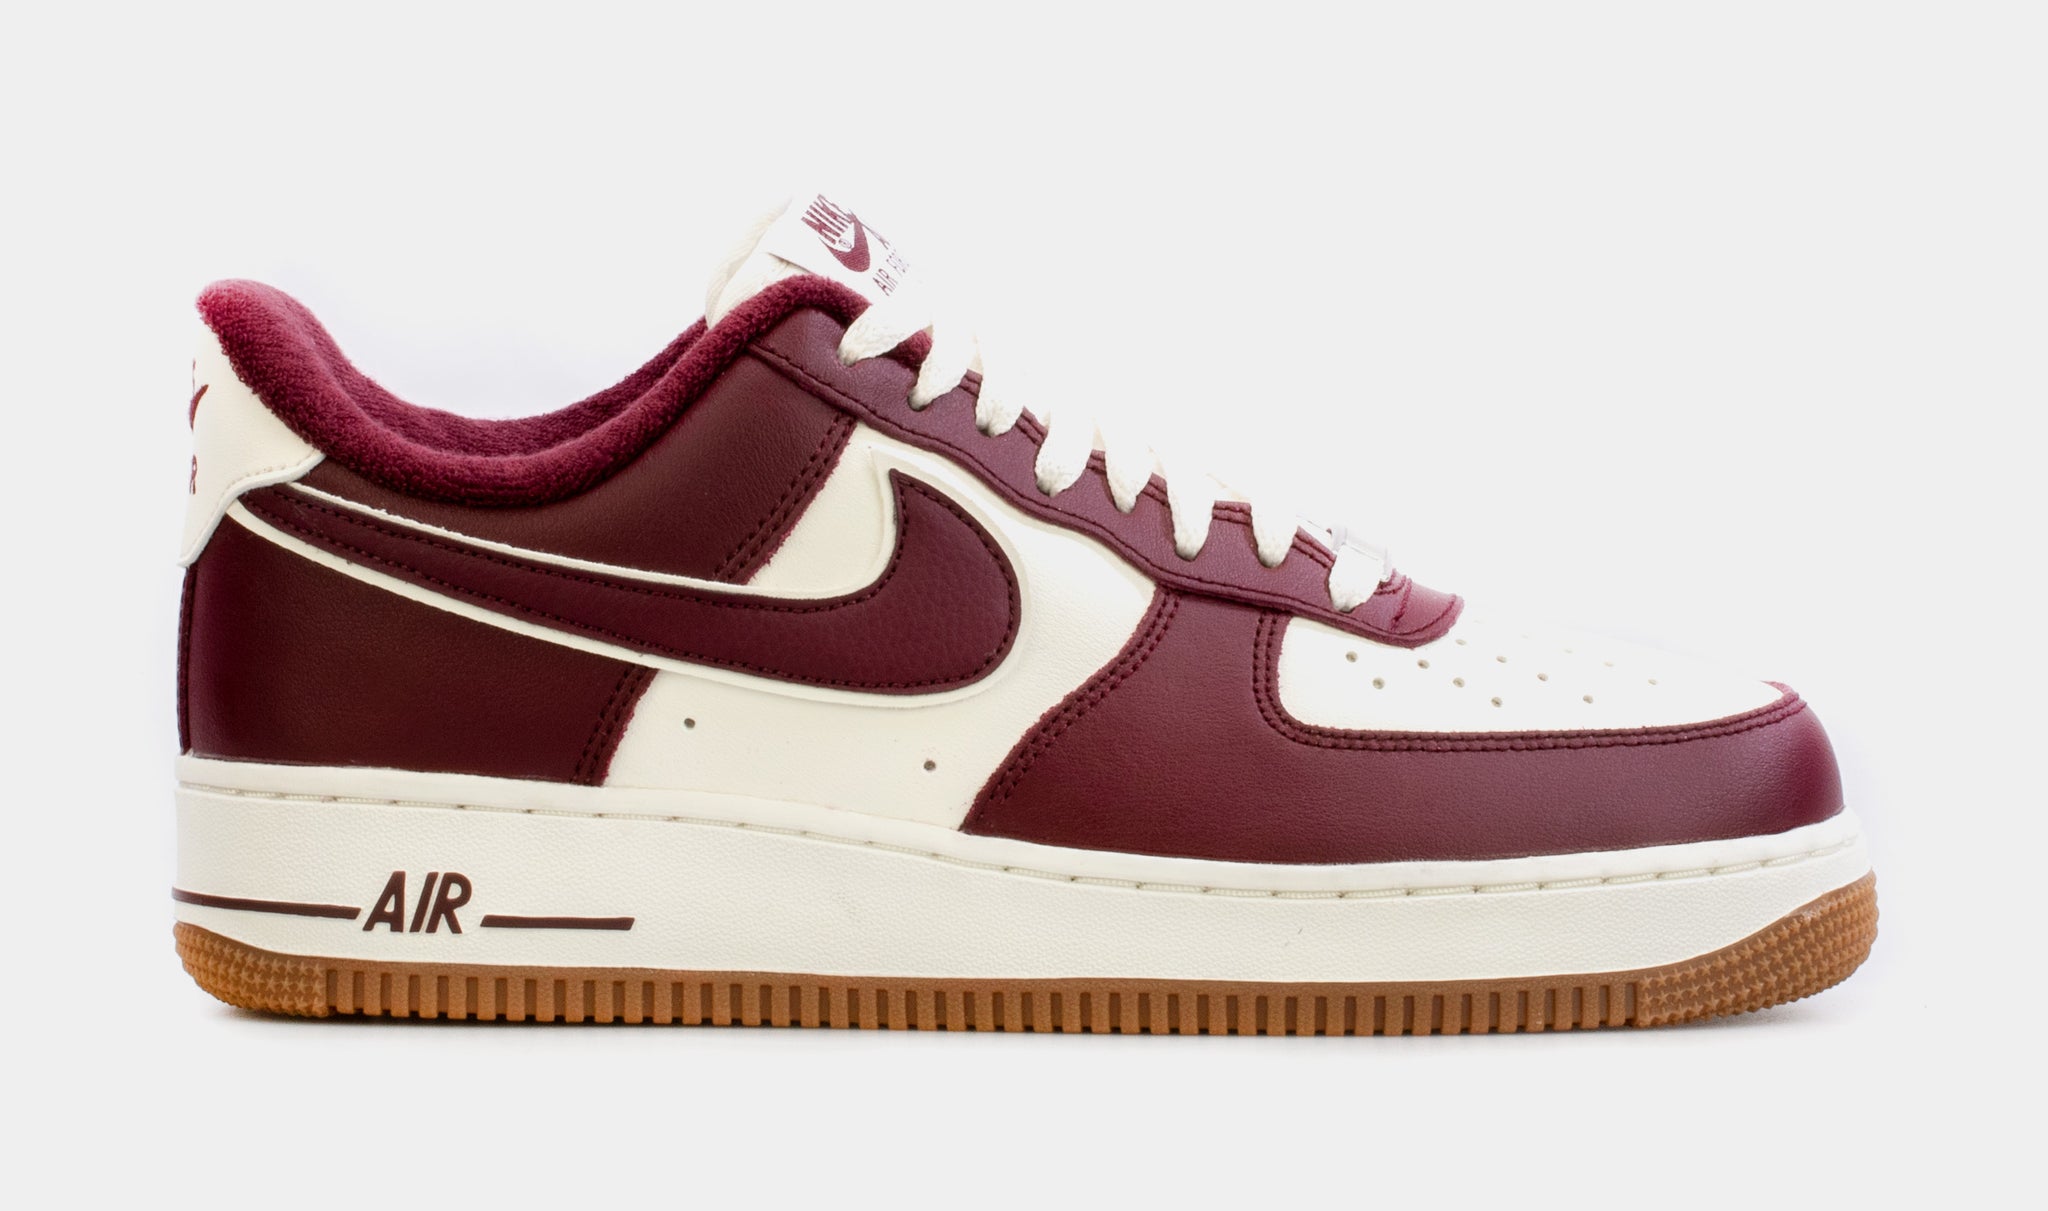 Nike Air Force 1 '07 Maroon Mens Lifestyle Shoes White – Shoe Palace